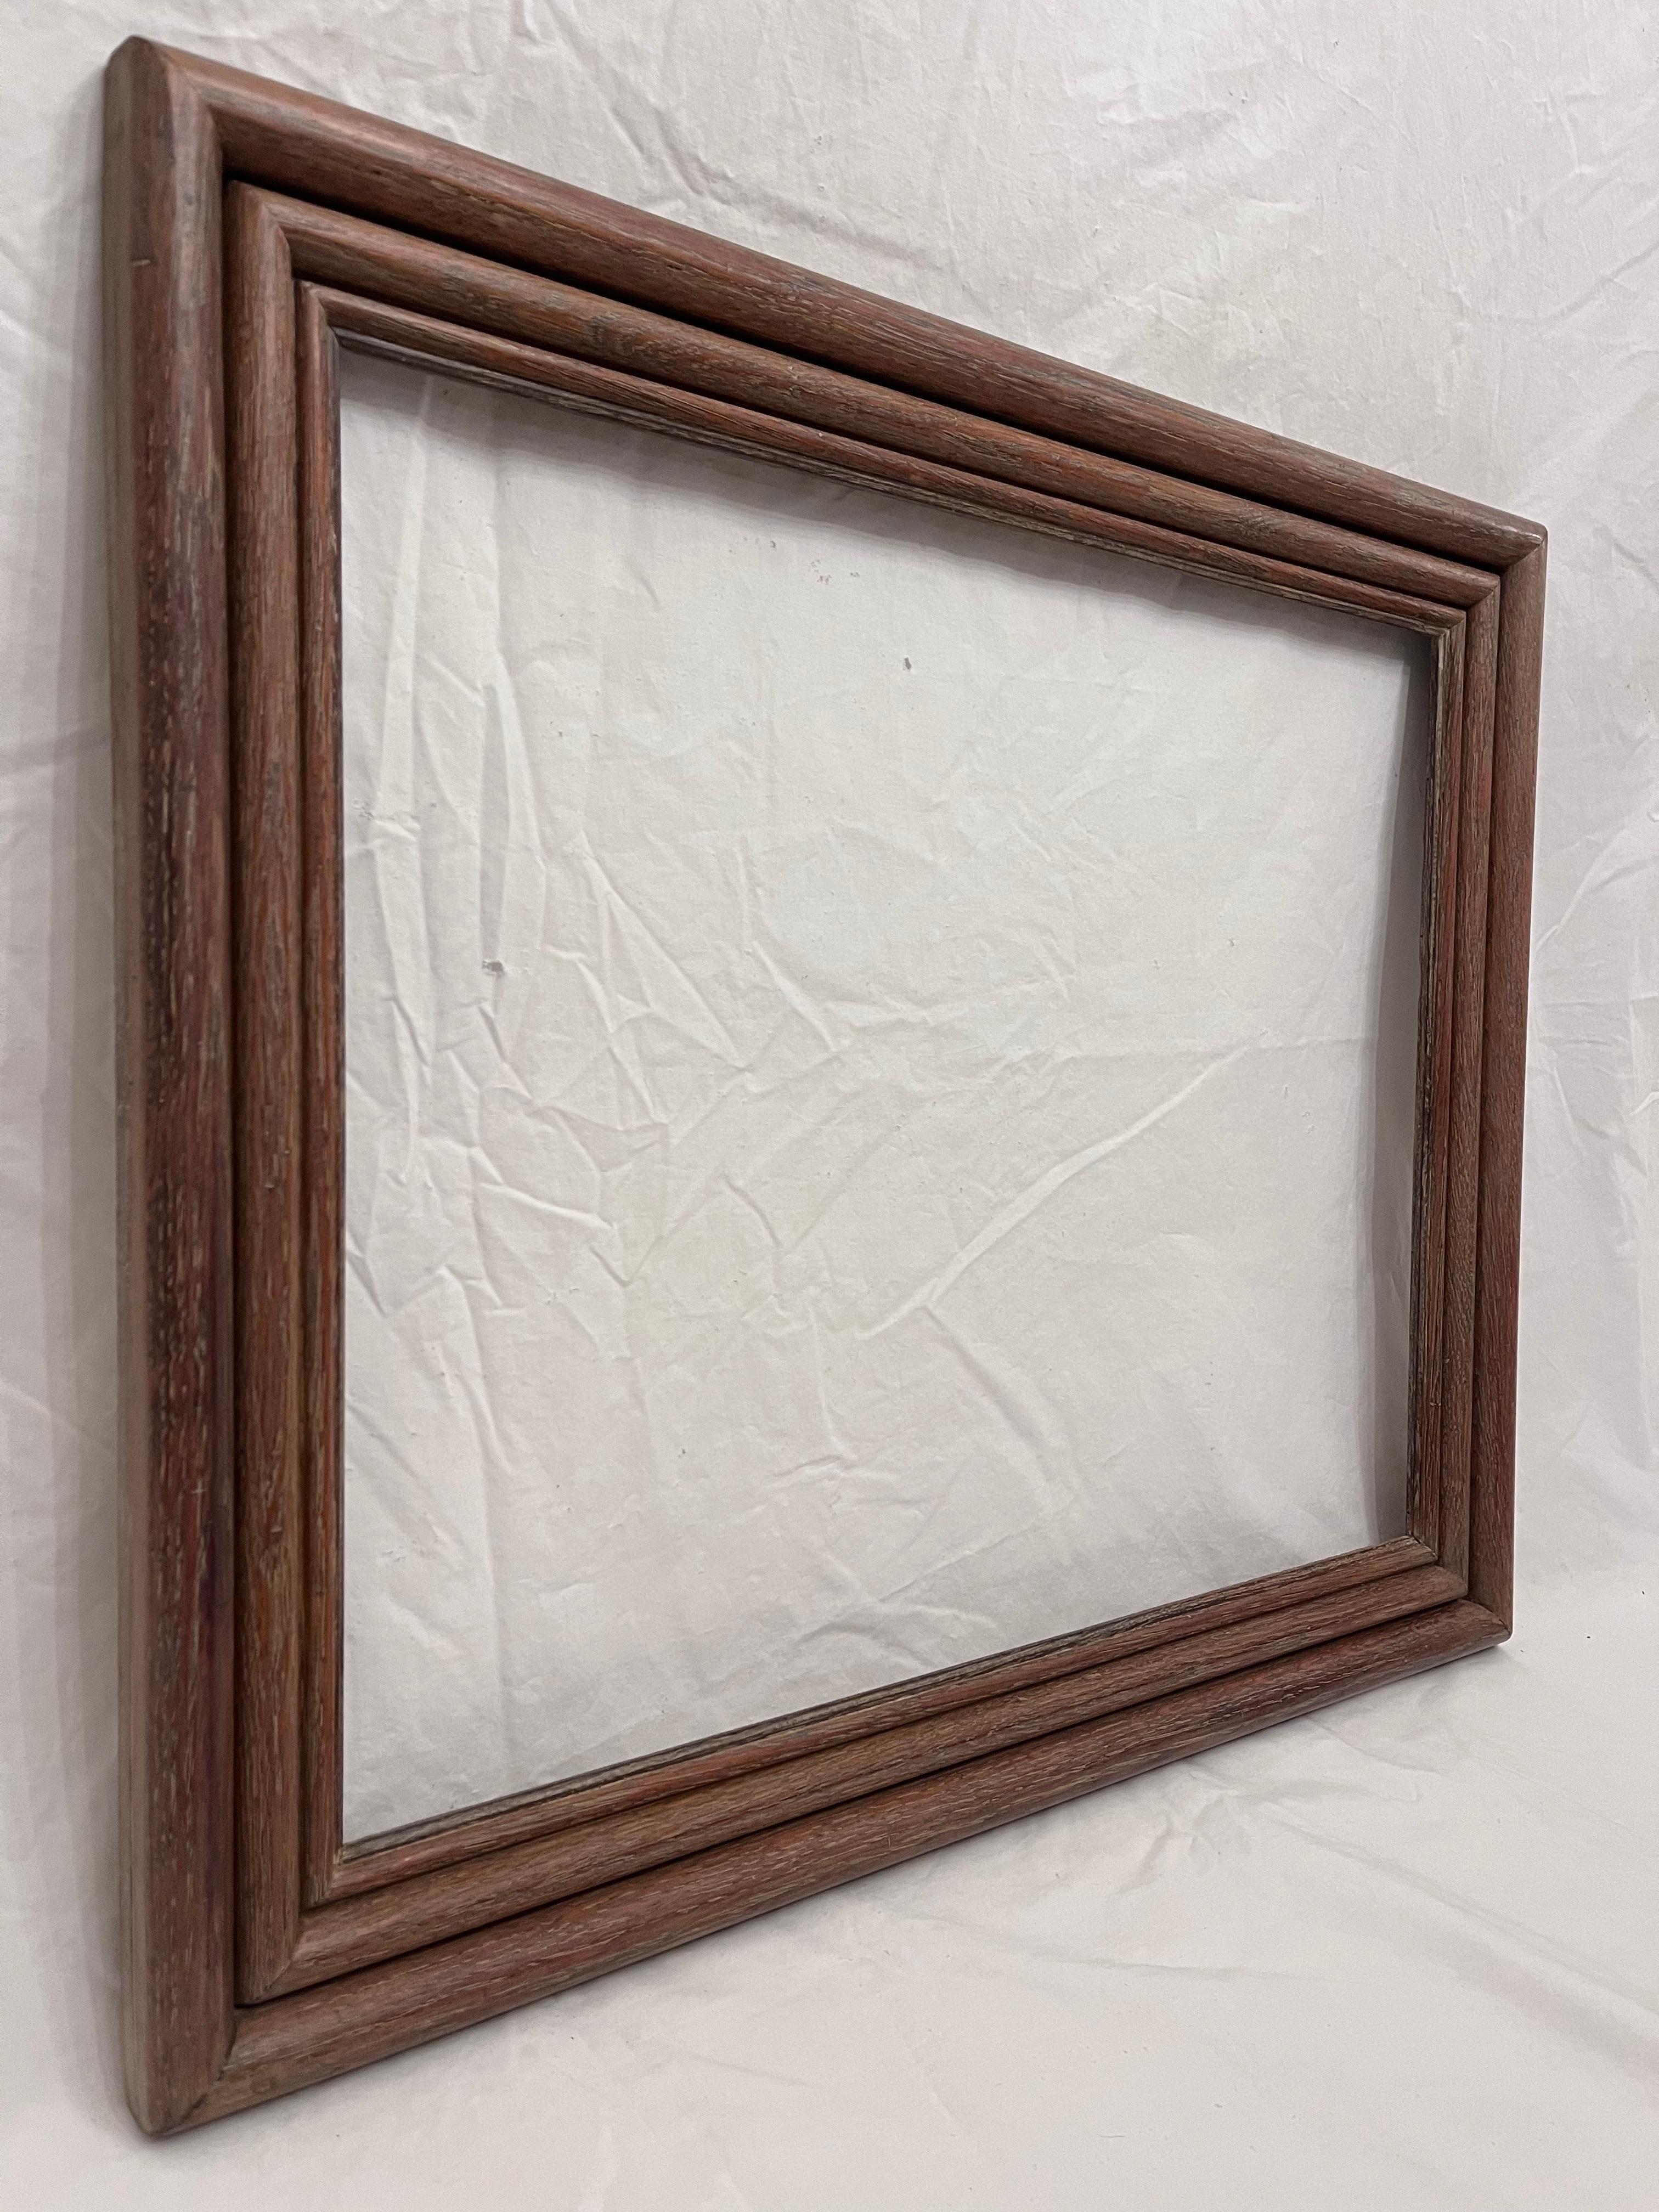 A beautiful and classically simple graduated triple bolection early to mid 20th century circa 1930's - 1940's American Modernist style picture frame. The rabbet size (size that holds the art) is 23